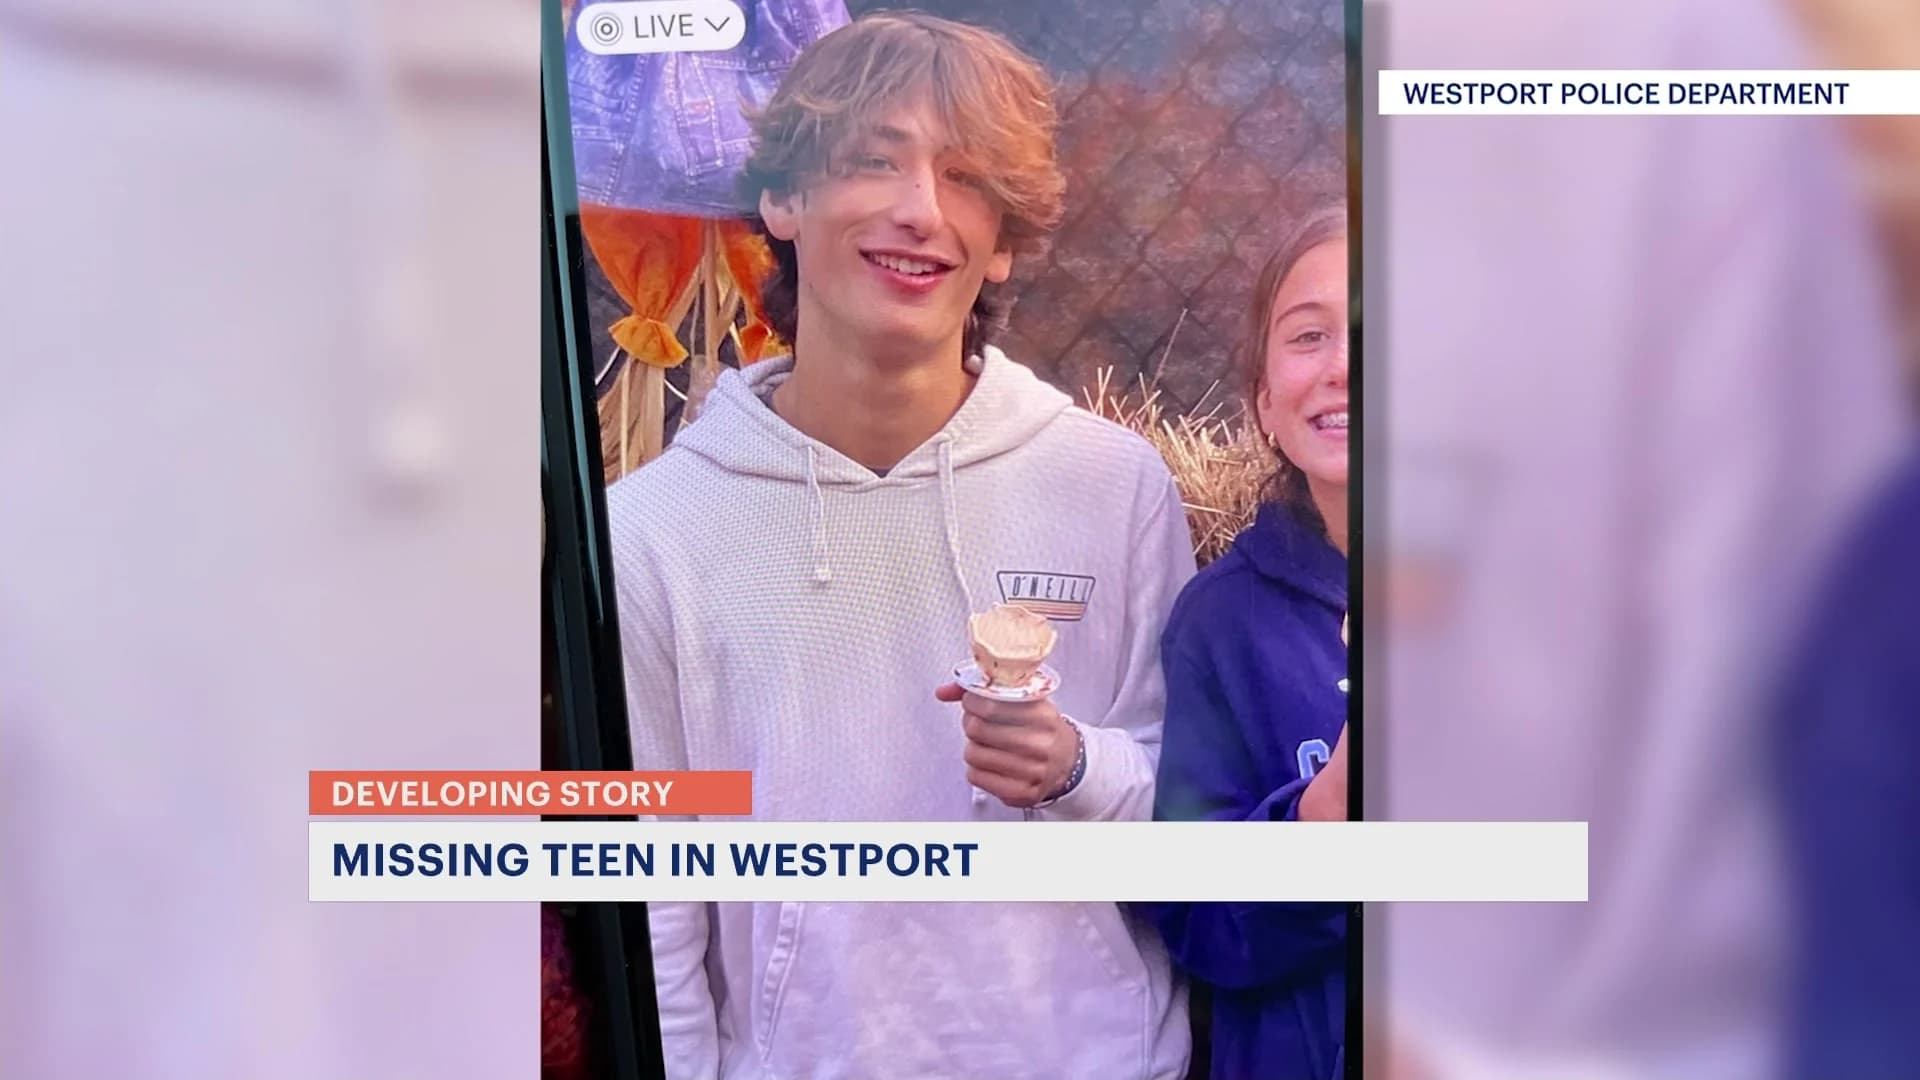 Police: Westport missing teen found in New York City and reunited with family